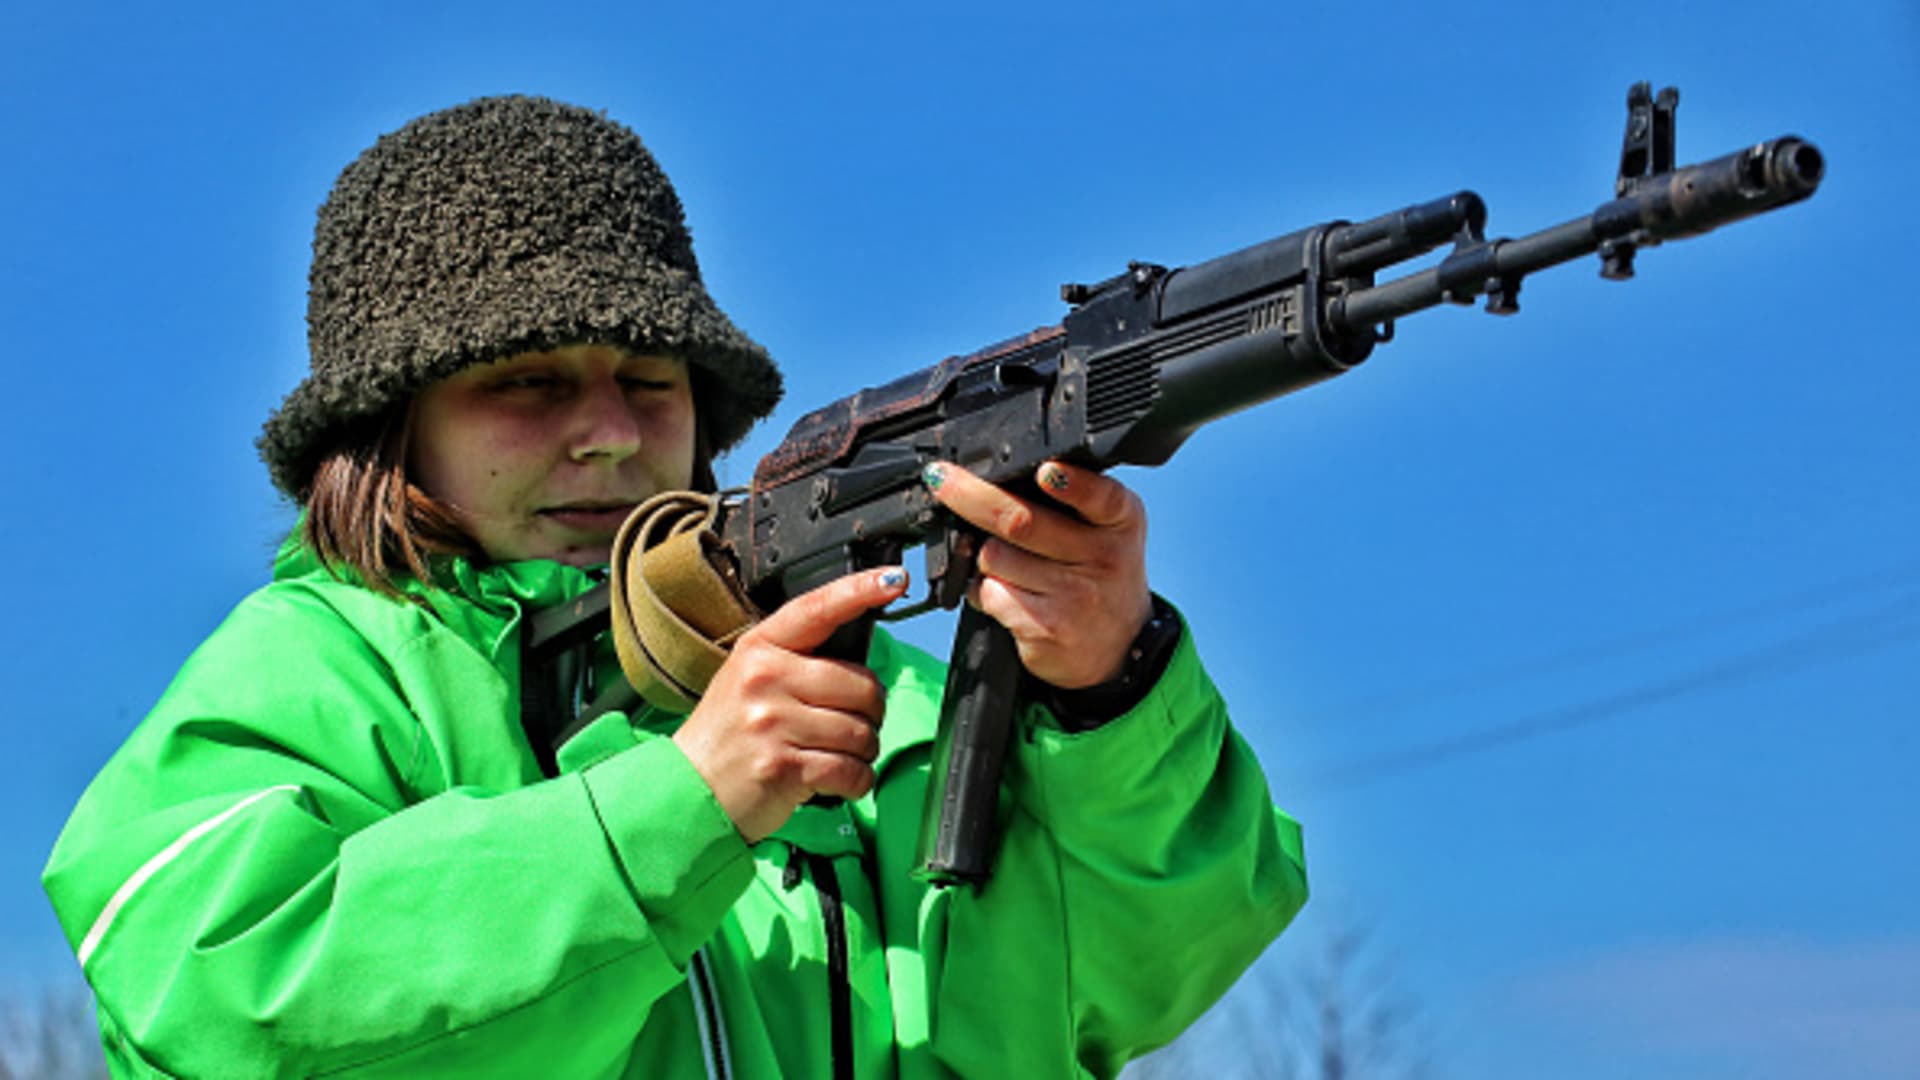 A participant of a civilian firearms training class takes aim at a target, Odessa, southern Ukraine